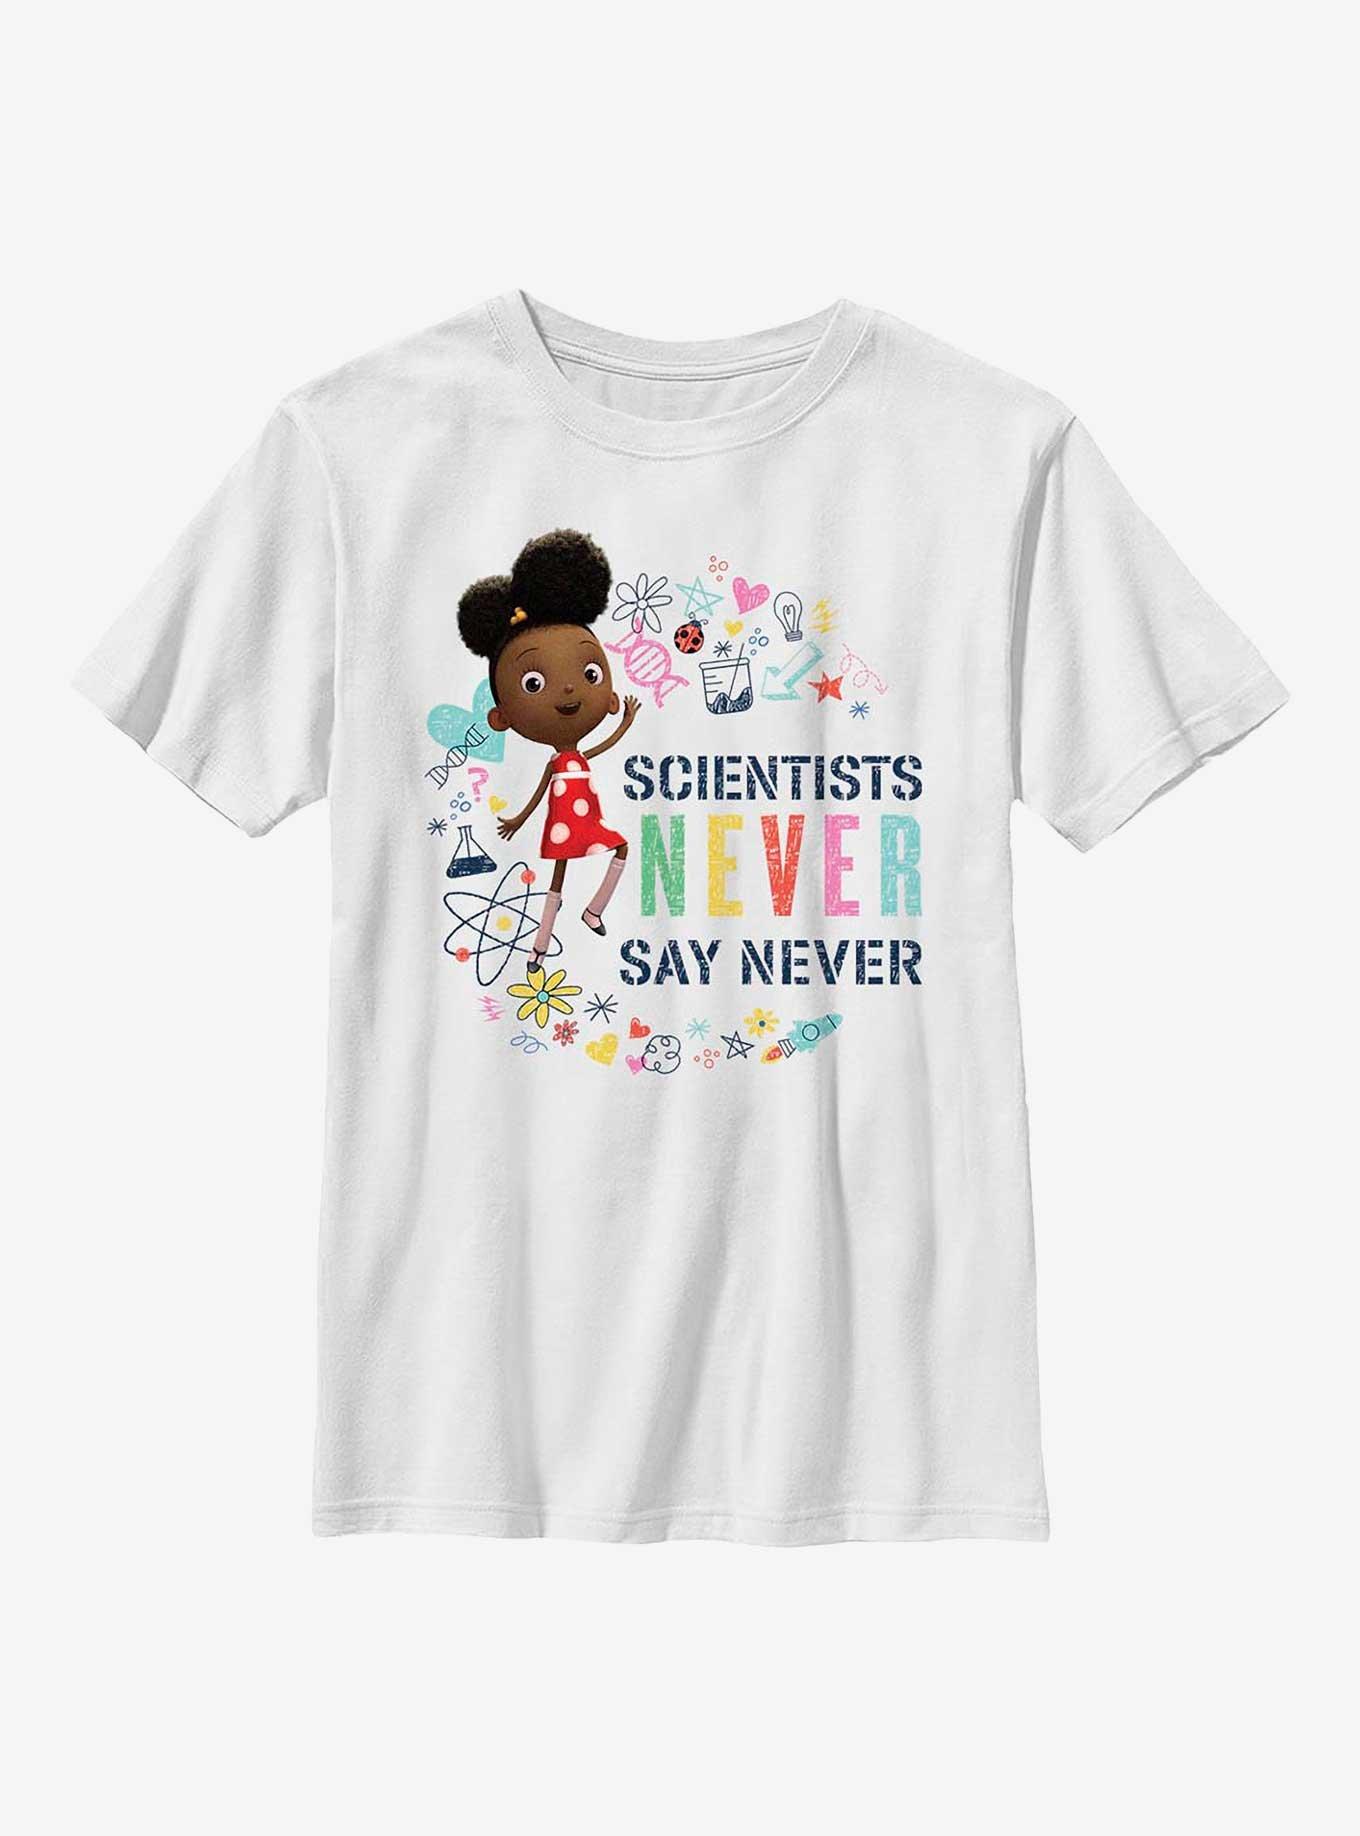 Ada Twist, Scientist Never Say Never Youth T-Shirt, WHITE, hi-res